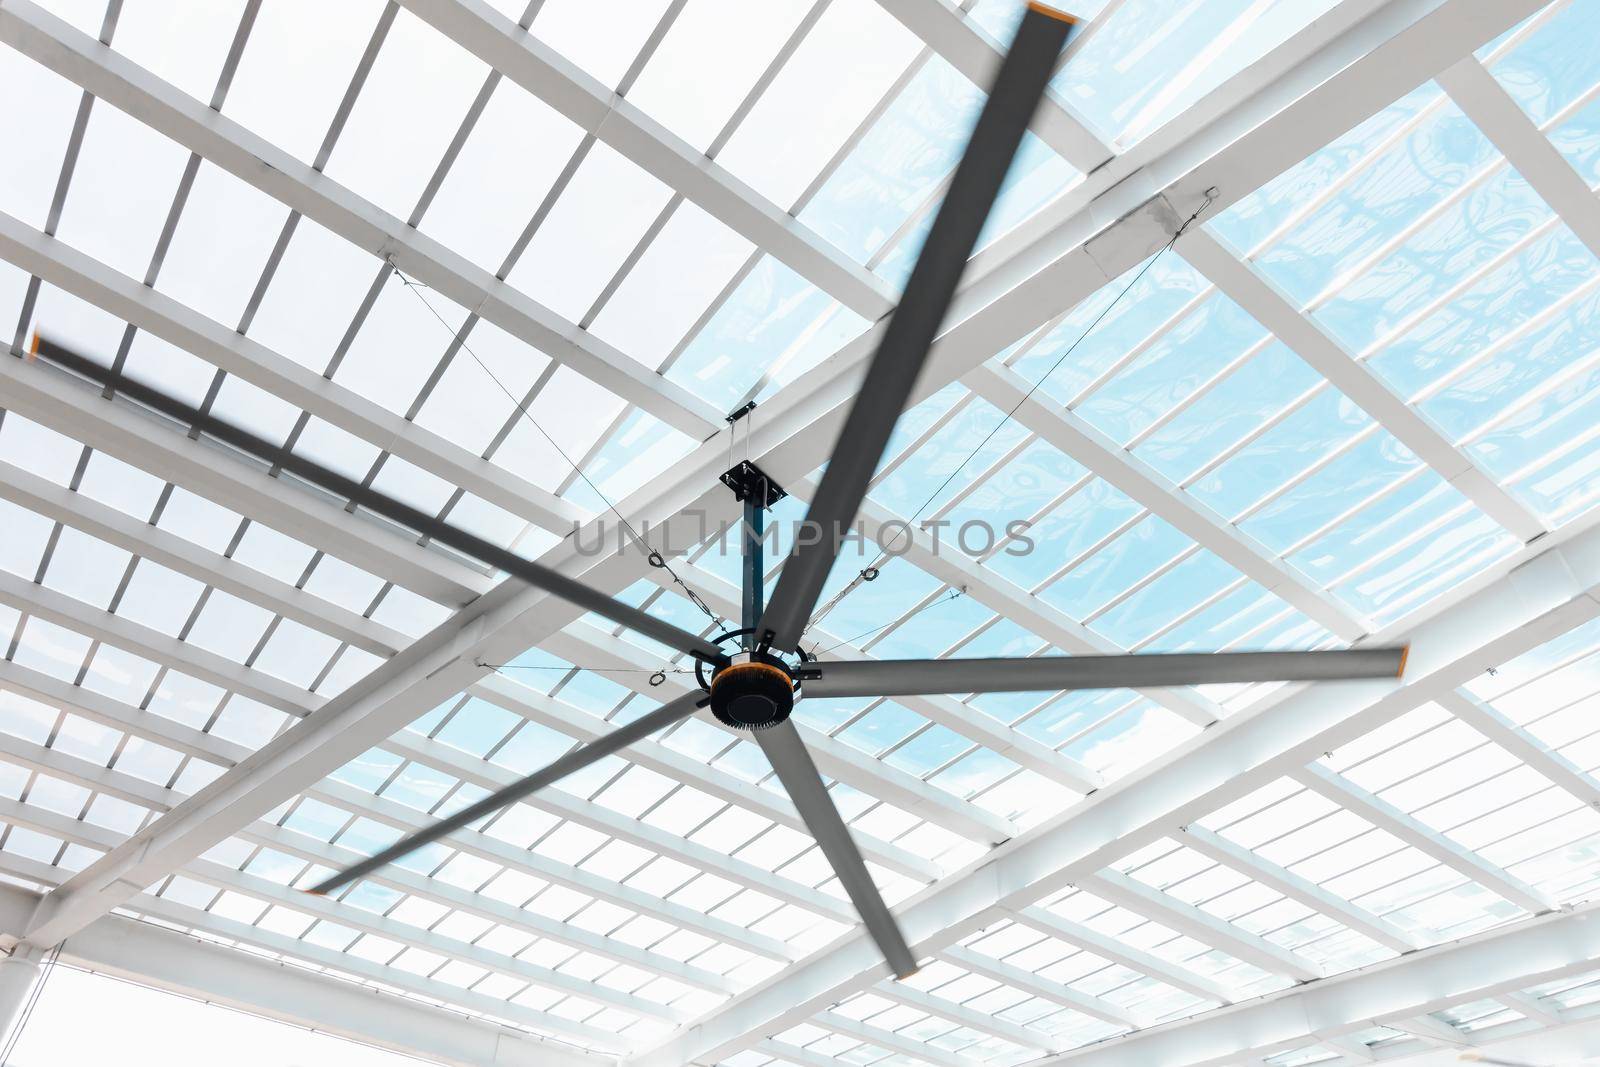 Ventilation Electrical Ceiling Fan Indoor Hall of Building, Luxury Modern Architecture Roofing Transparent Grass and Structure Metal Frame. Electric Ventilator Fan Against Geometric Structures Frame